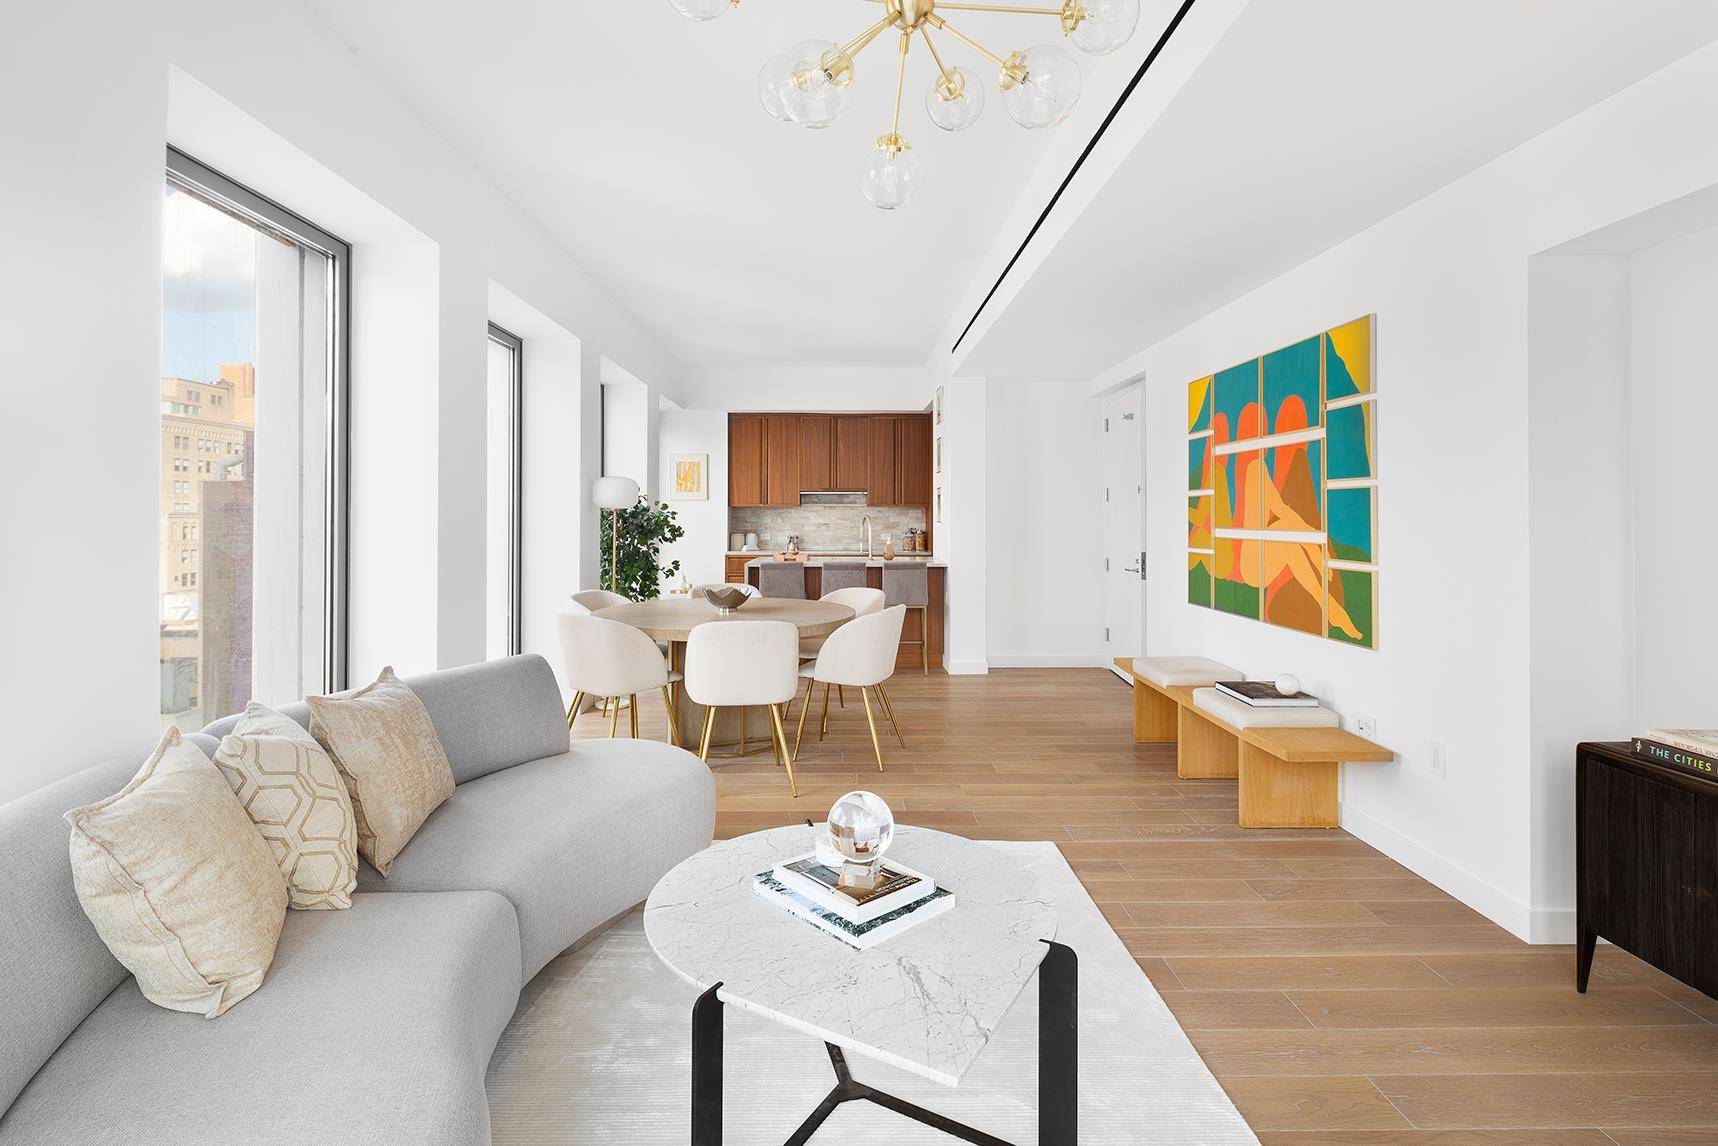 NOW OFFERING 2 YEARS FREE OF COMMON CHARGES Welcome to the Neo Gothic splendor that is 30 East 31 in the historic and trendy NoMad North of Madison Square Park, ...